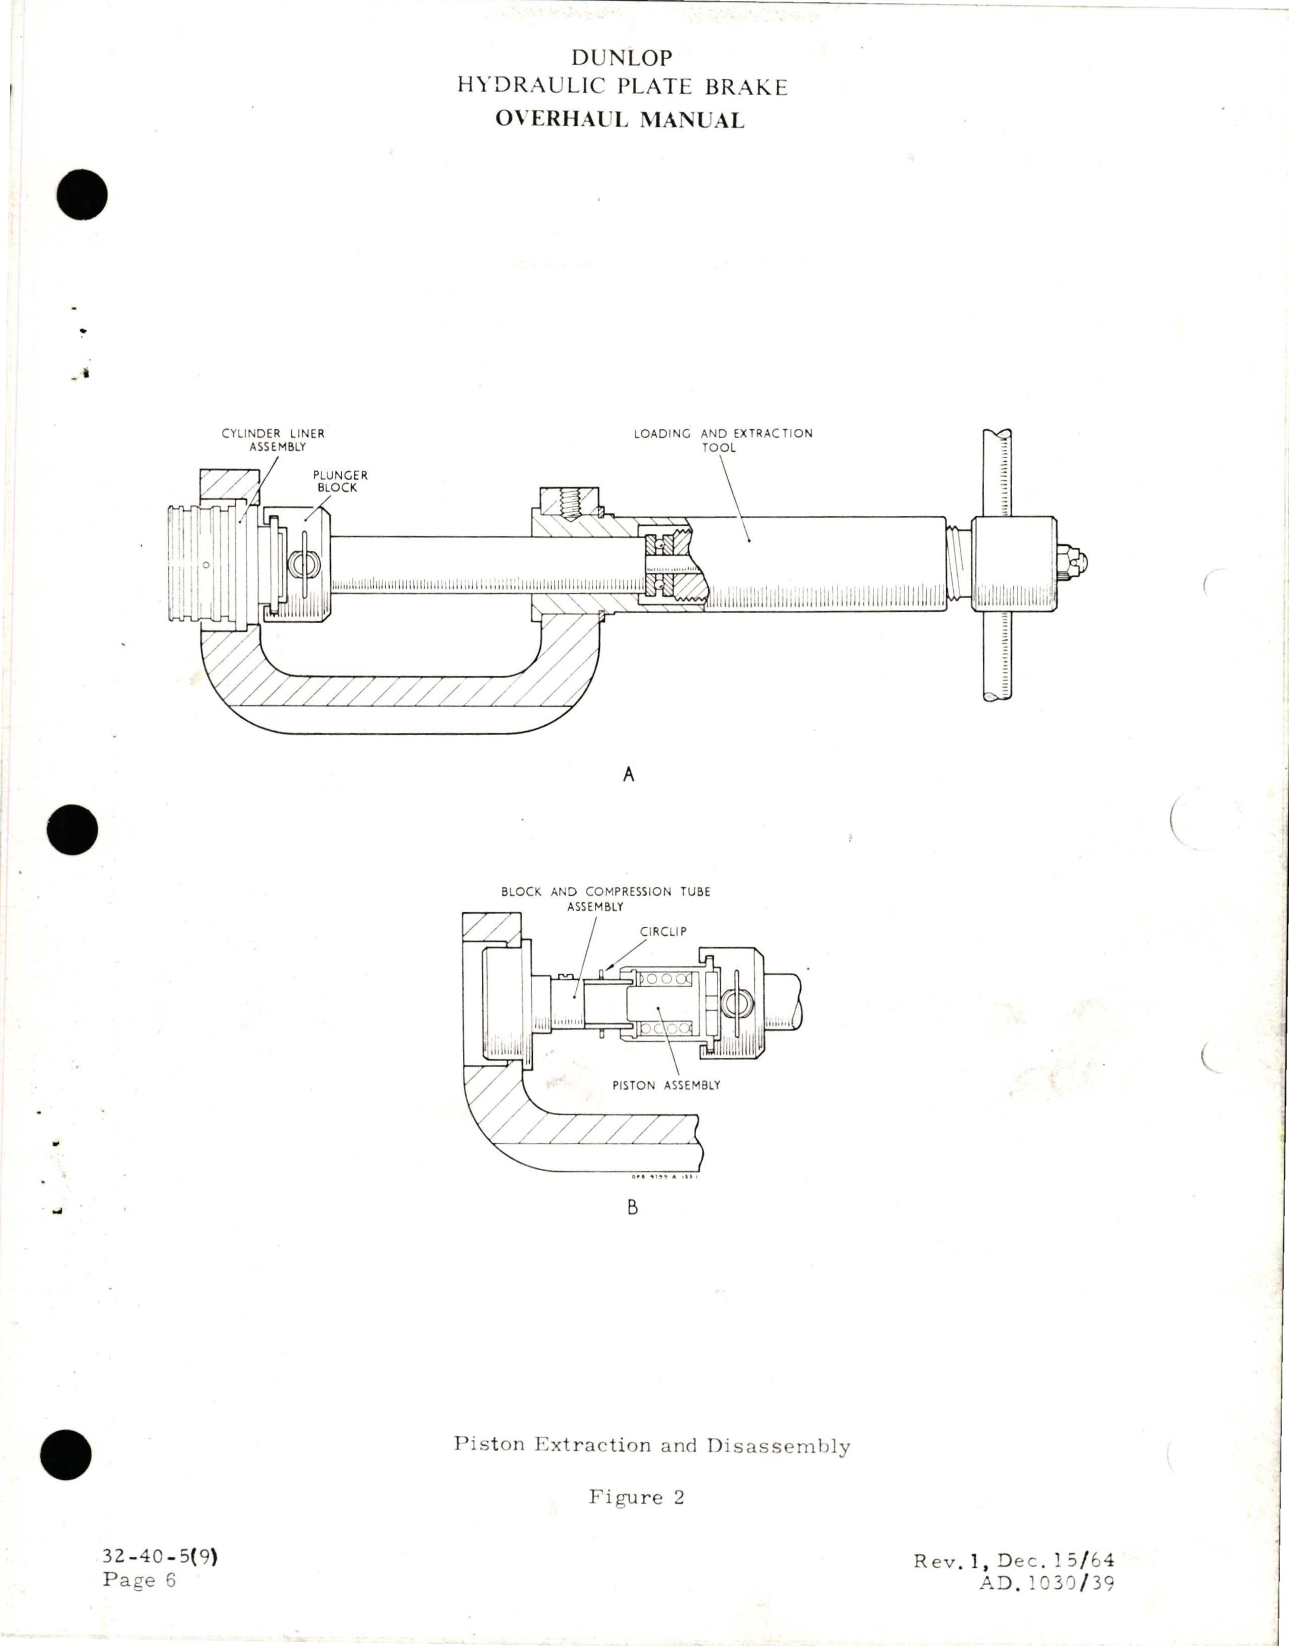 Sample page 7 from AirCorps Library document: Overhaul for Hydraulic Plate Brake